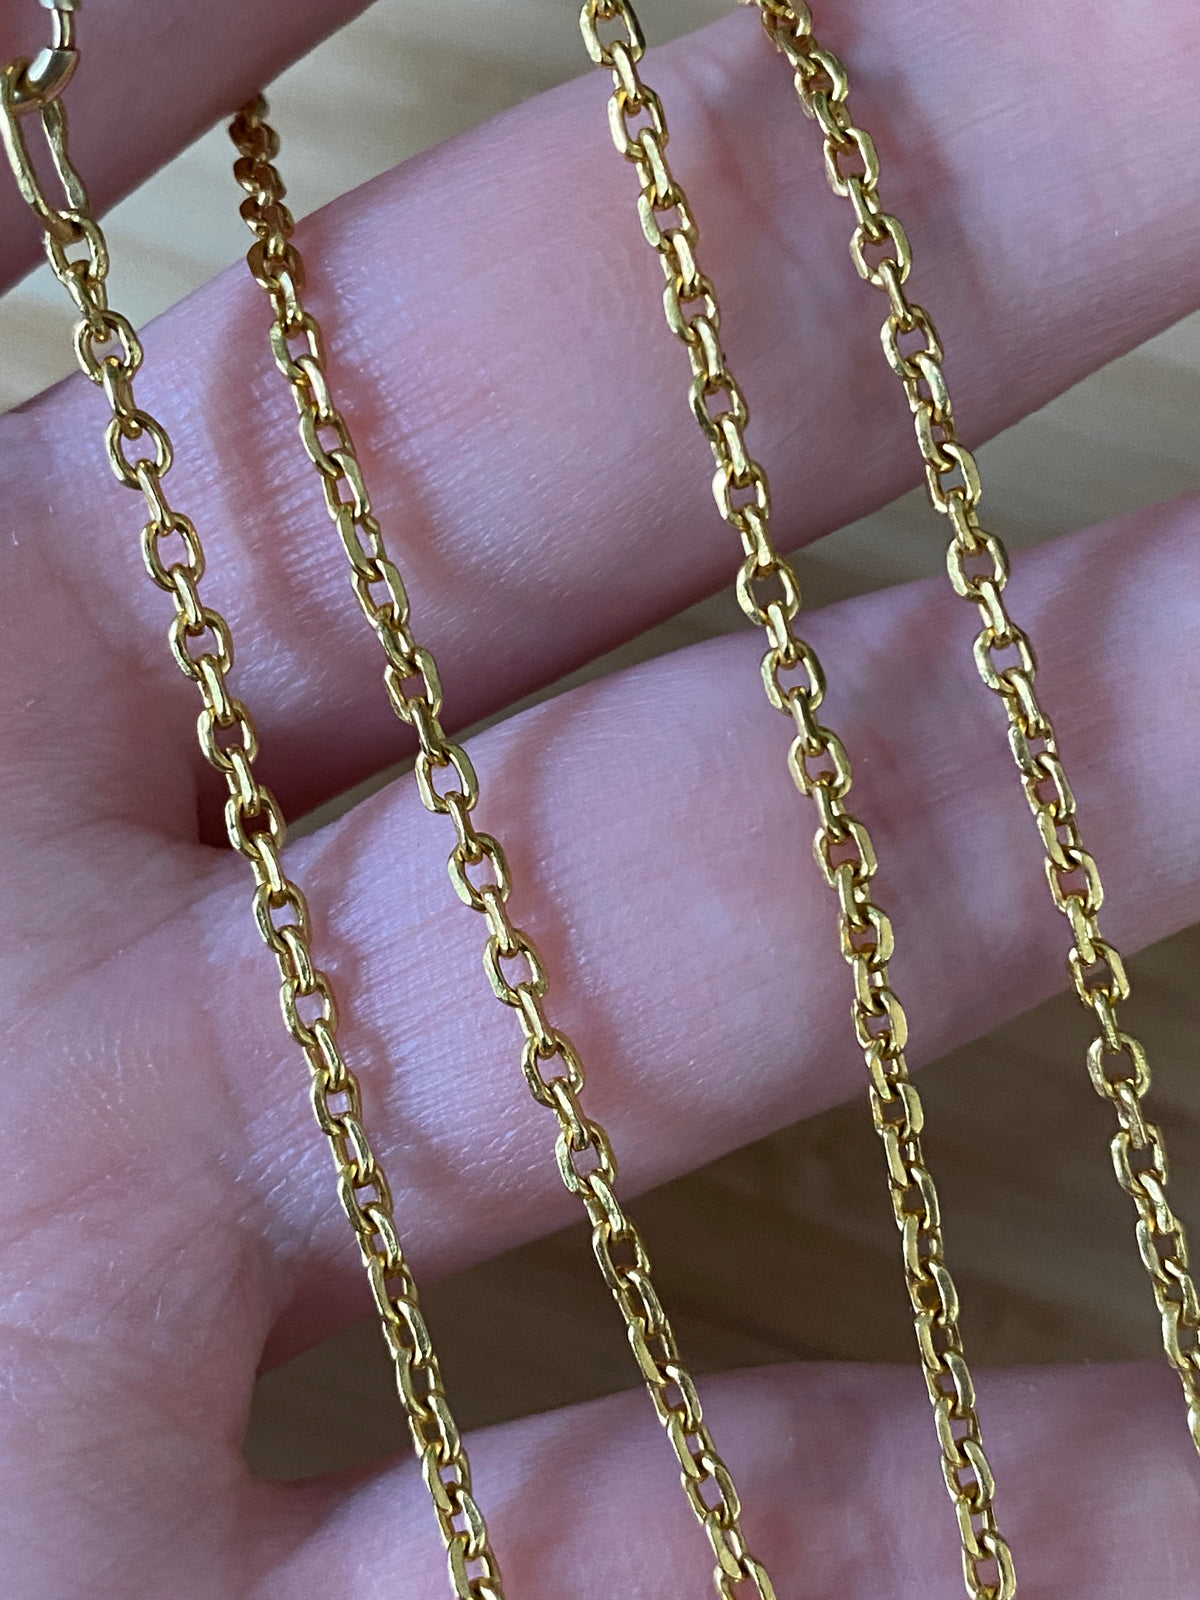 22K Gold 1 inch Extension Chain - Rings Chain for Necklaces, Chains &  Bracelets - 1-GH108 in 0.700 Grams